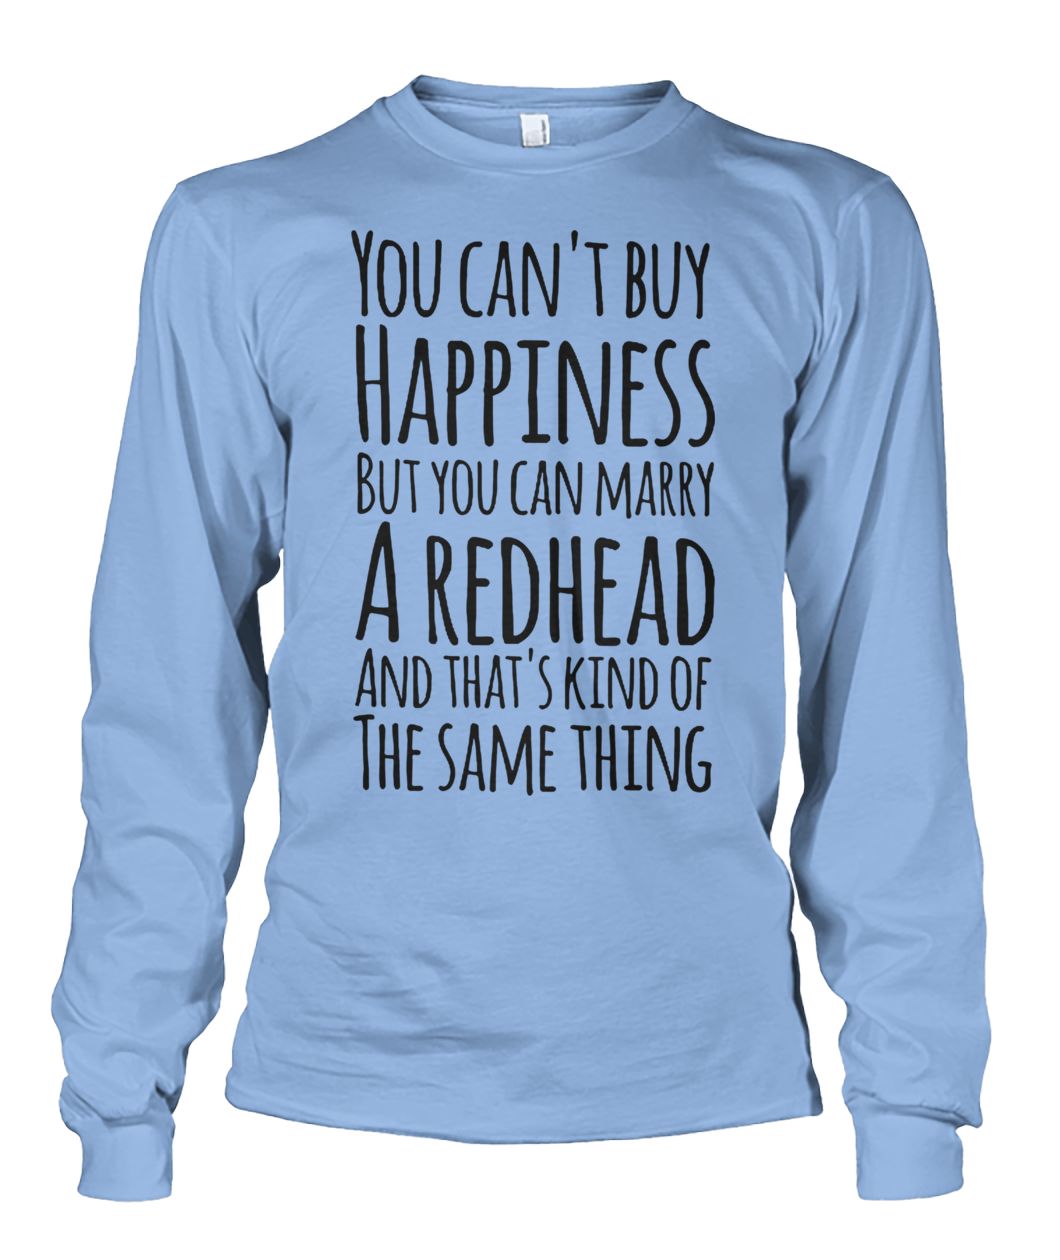 You can’t buy happiness but you can marry a redhead and that’s kind of the same thing unisex long sleeve